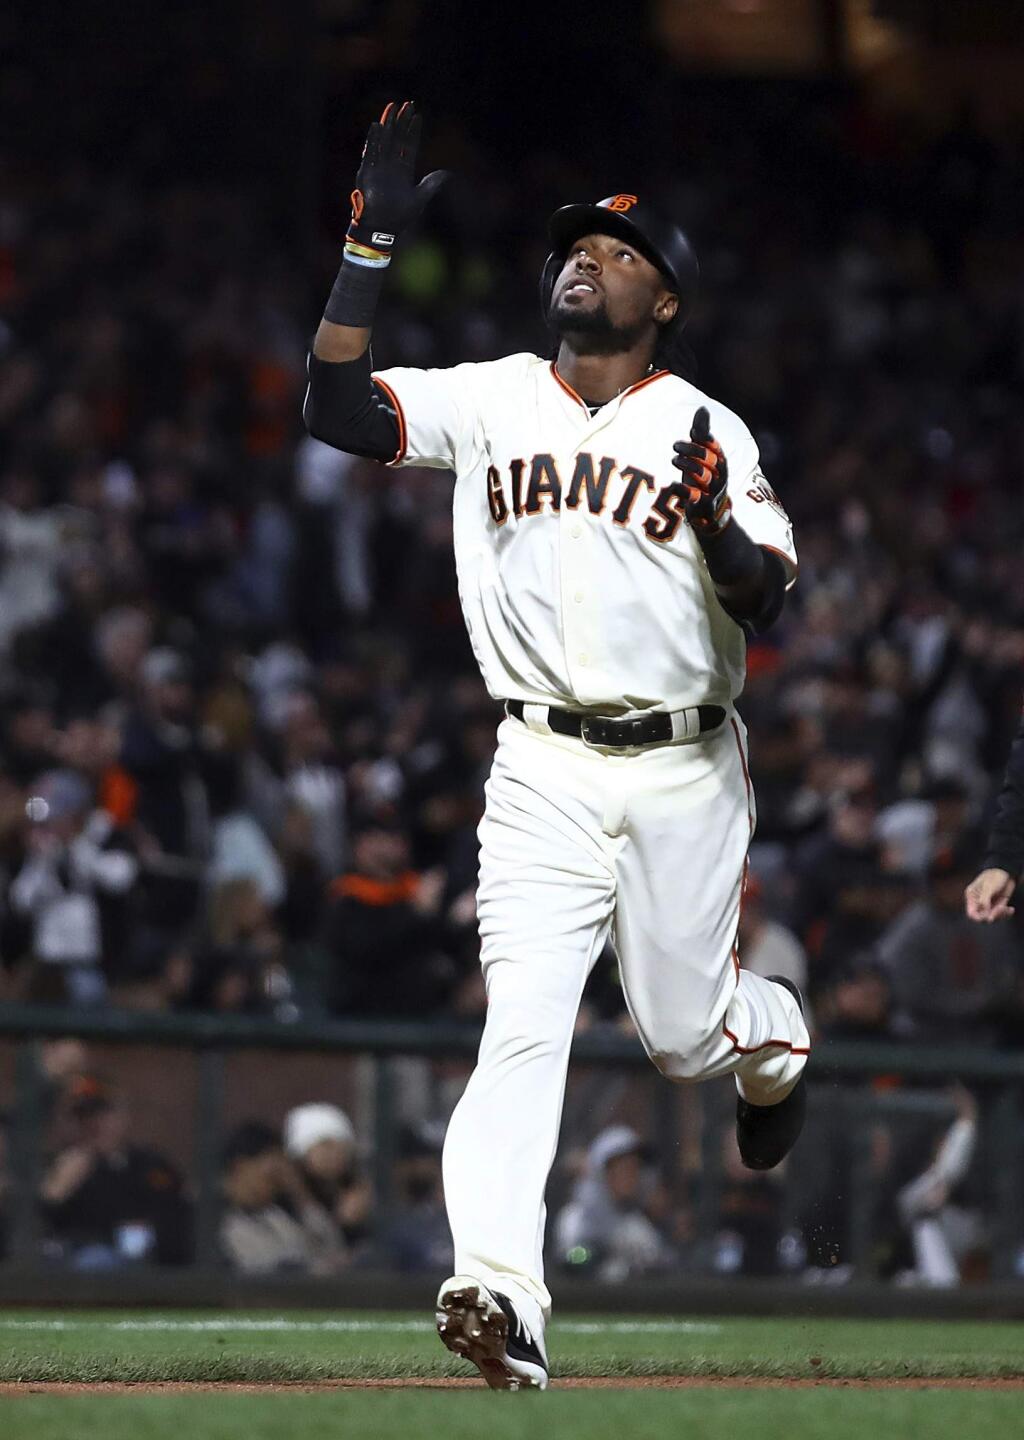 The San Francisco Giants' Alen Hanson celebrates after hitting a two-run home run off St. Louis Cardinals' Luke Weaver during the sixth inning of a baseball game Thursday, July 5, 2018, in San Francisco. (AP Photo/Ben Margot)